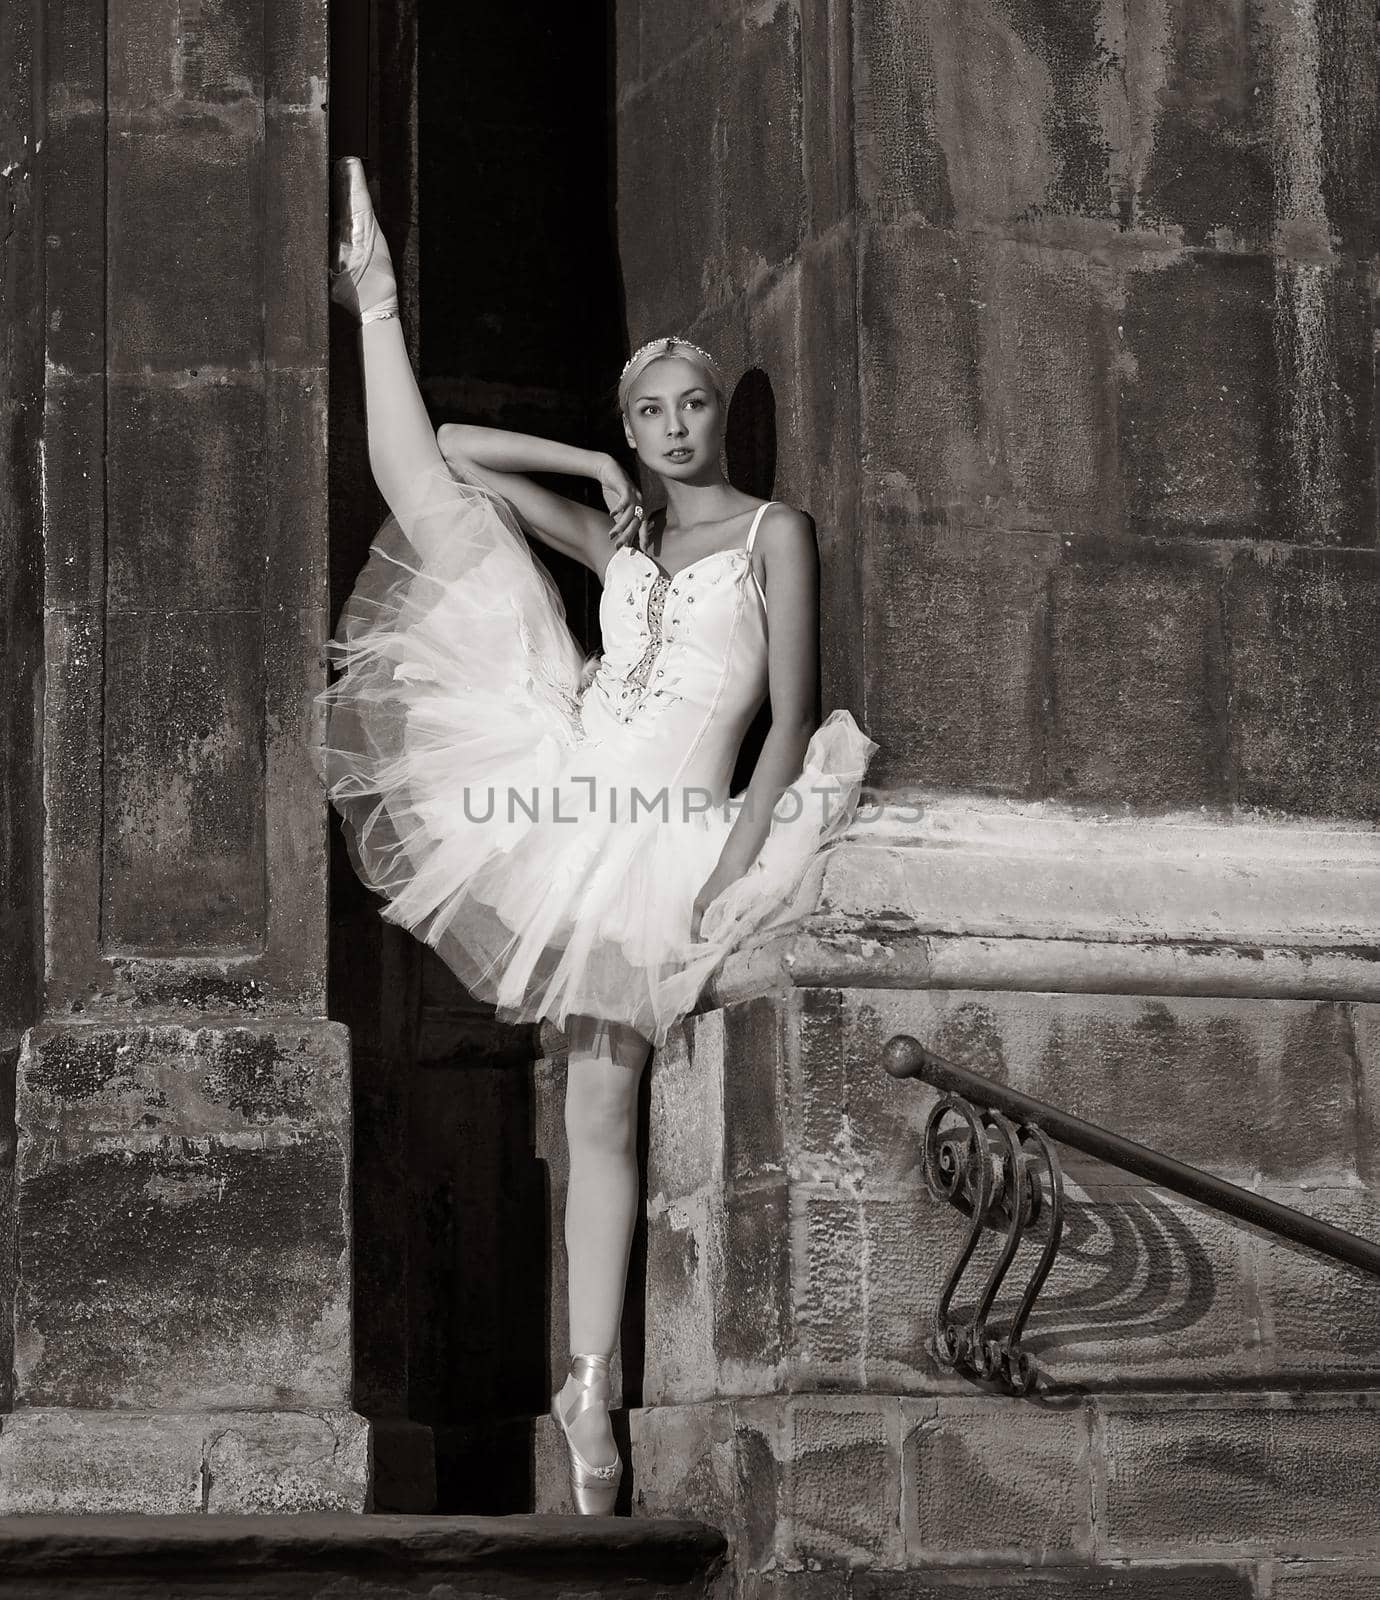 Artistic look. Monochrome portrait of a beautiful ballet dancer posing near the wall looking away thoughtfully soft focus picture